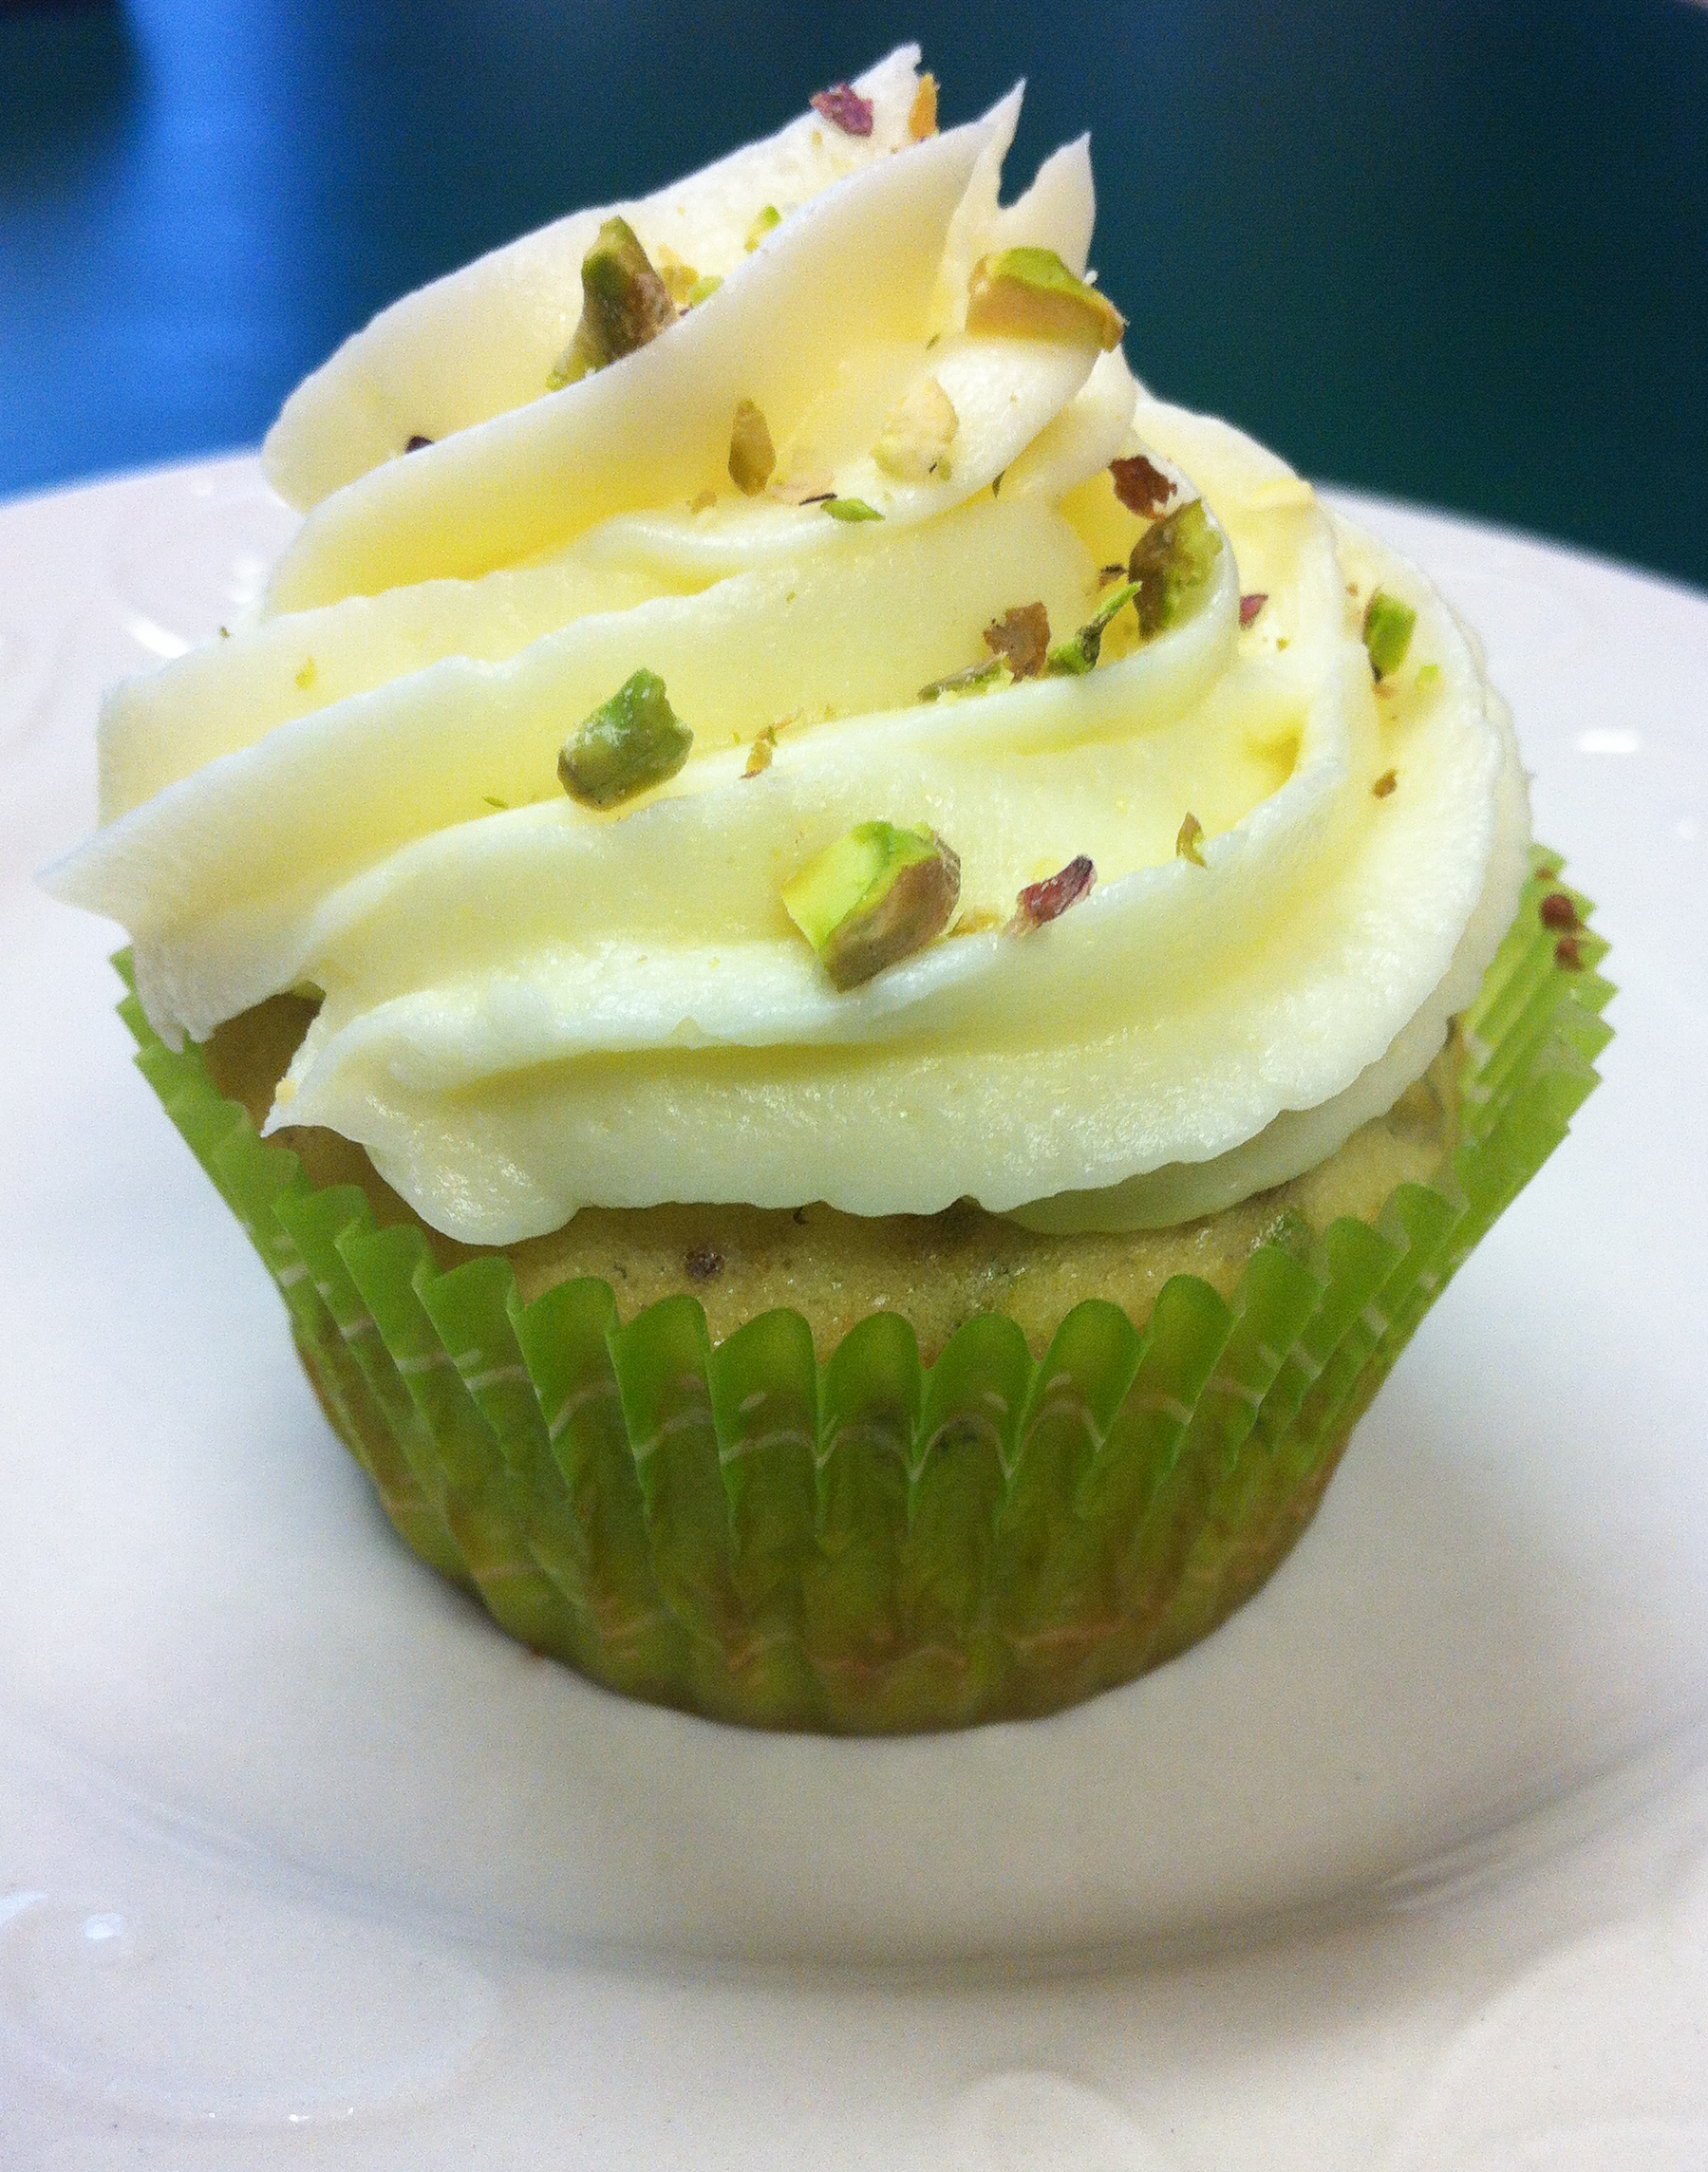 Pistachio Cupcakes with Buttercream Frosting